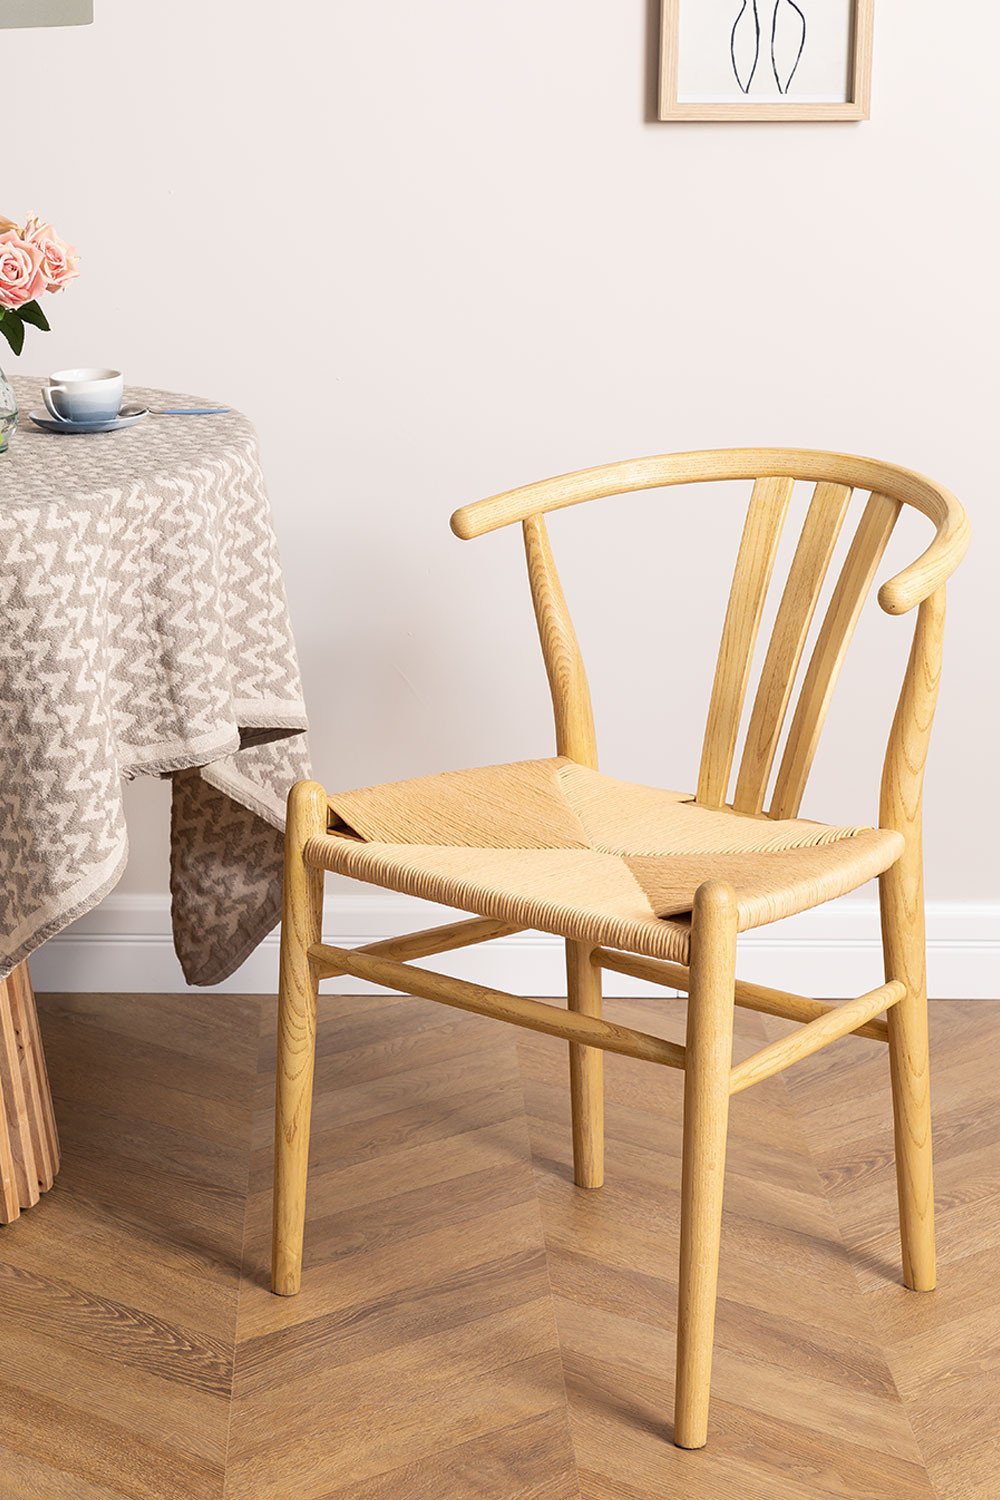 Wooden Dining Chair Uish Retro , gallery image 1